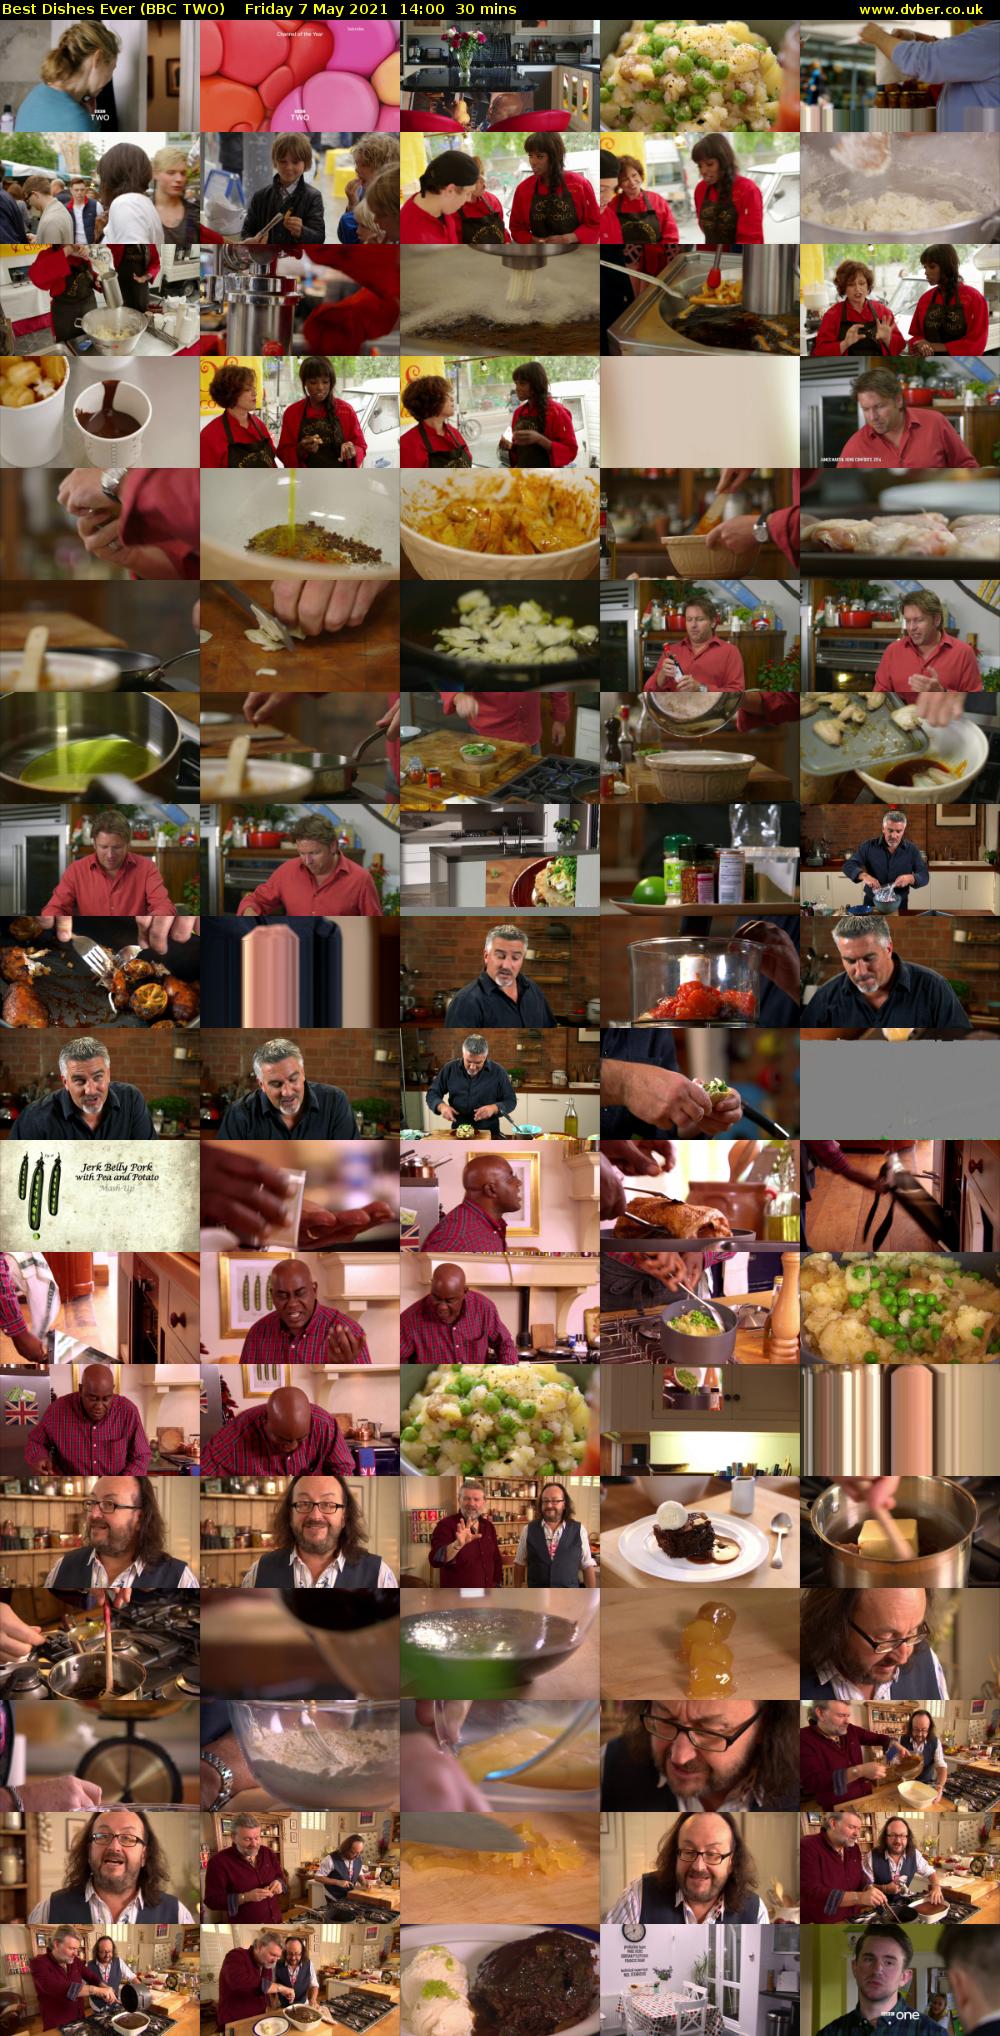 Best Dishes Ever (BBC TWO) Friday 7 May 2021 14:00 - 14:30